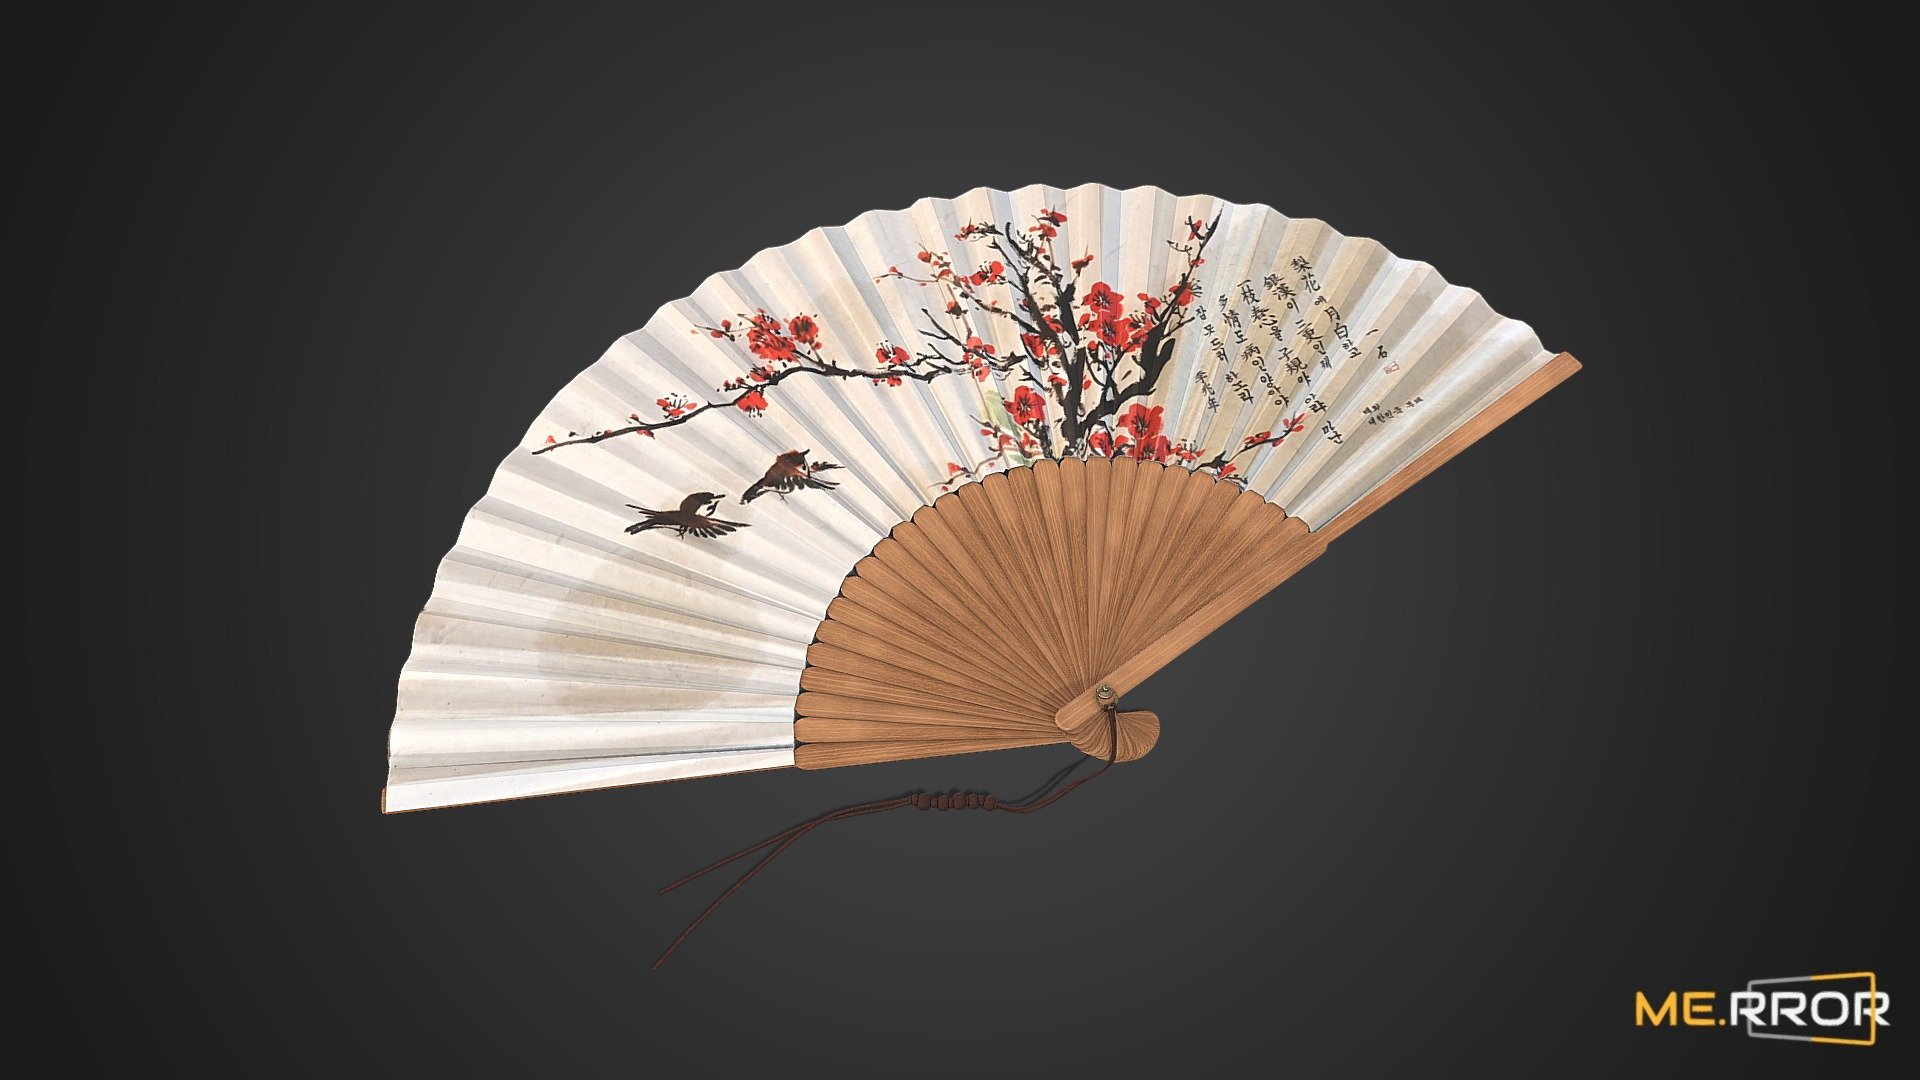 MERROR is a 3D Content PLATFORM which introduces various Asian assets to the 3D world


3DScanning #Photogrametry #ME.RROR - [Game-Ready] Korean Traditional Fan - Buy Royalty Free 3D model by ME.RROR Studio (@merror) 3d model